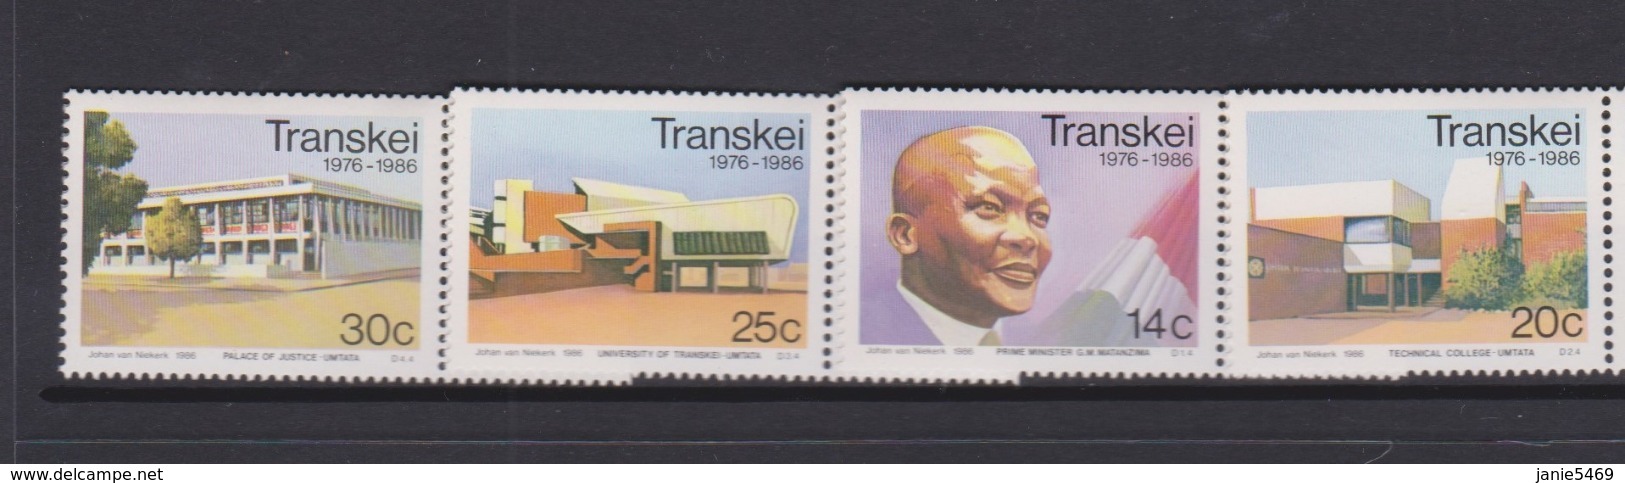 South Africa-Transkei SG 193-196 1986 10th Anniversary Of Independence,Mint Never Hinged - Transkei